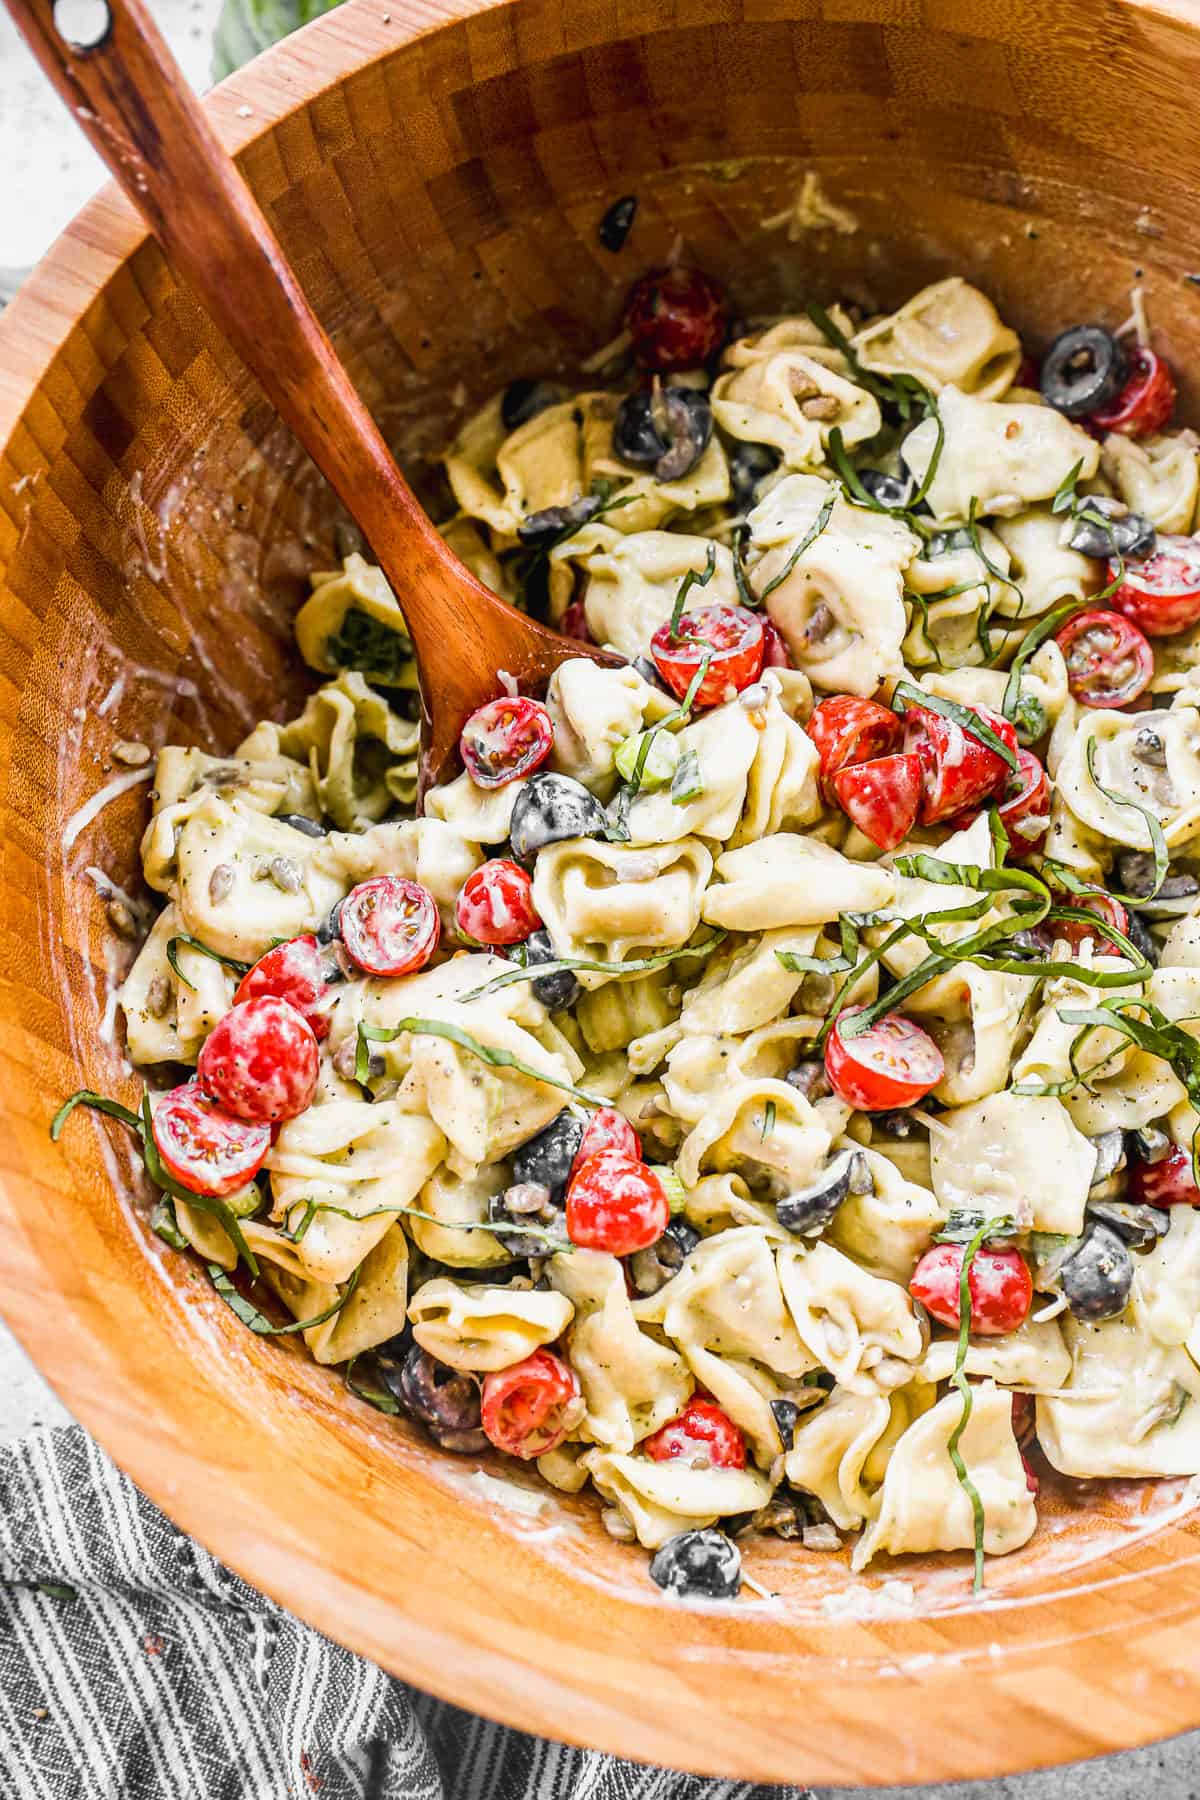 A wooden bowl filled with Pesto Tortellini salad, ready to serve.